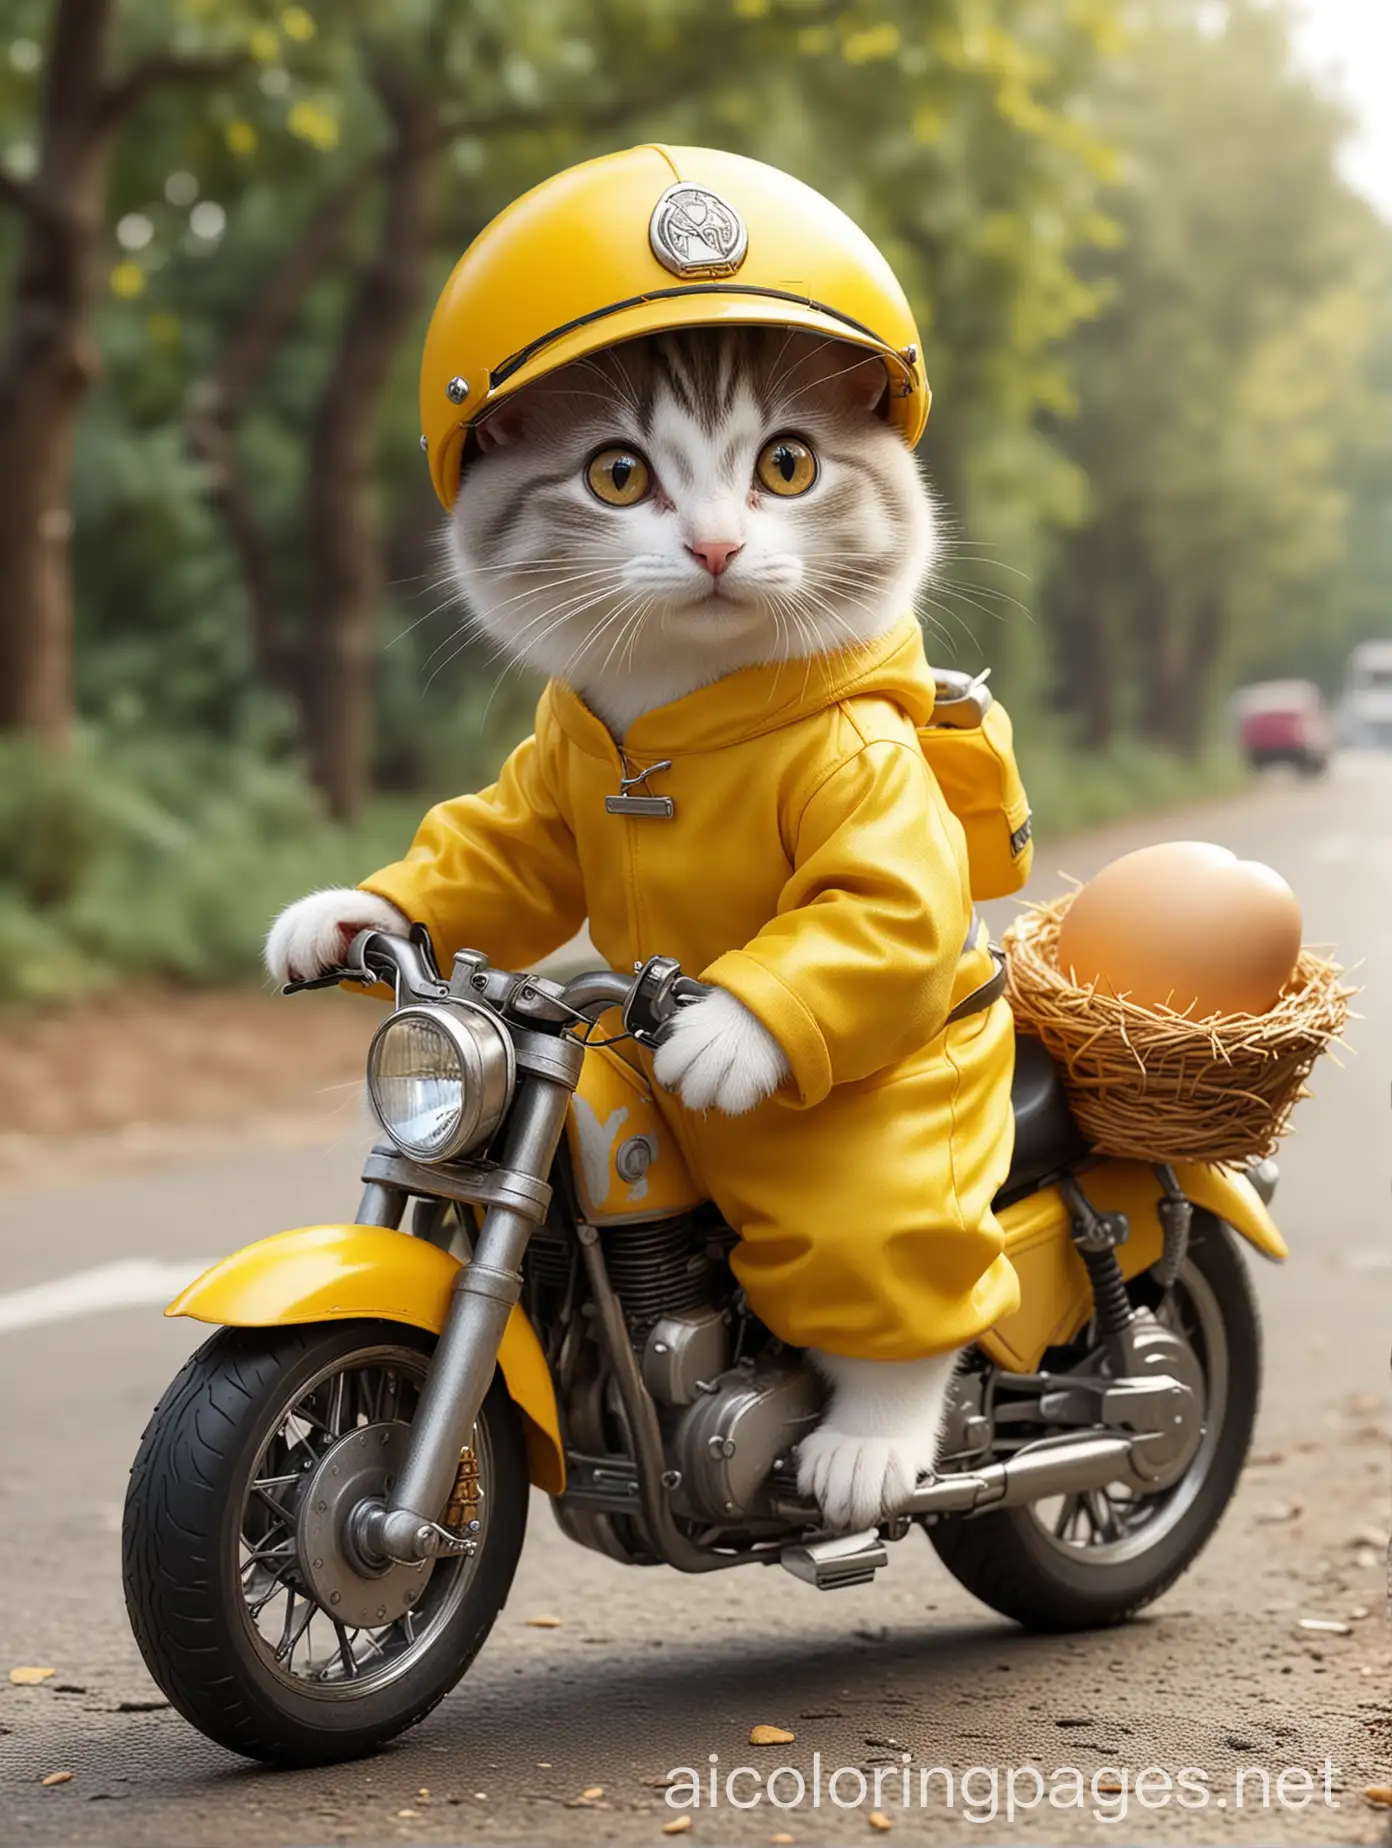 Mini-Kitten-Delivery-Cat-Riding-Motorcycle-Finds-Golden-Egg-Coloring-Page